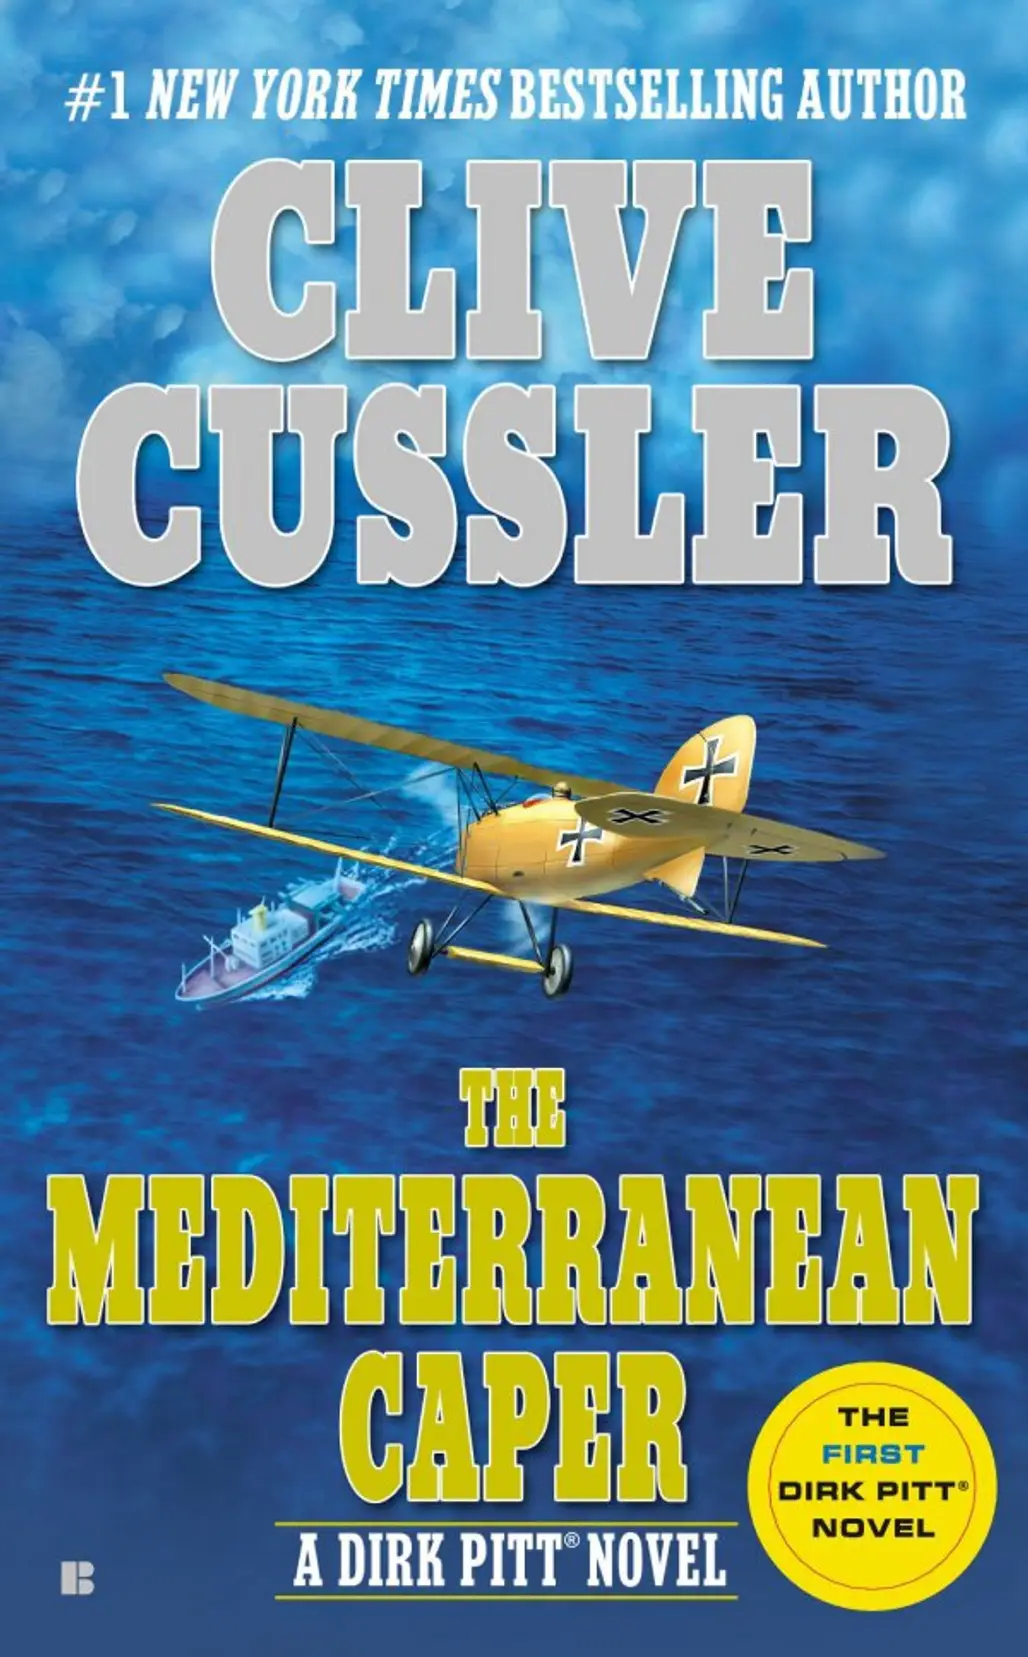 The Dirk Pitt Adventures by Clive Cussler